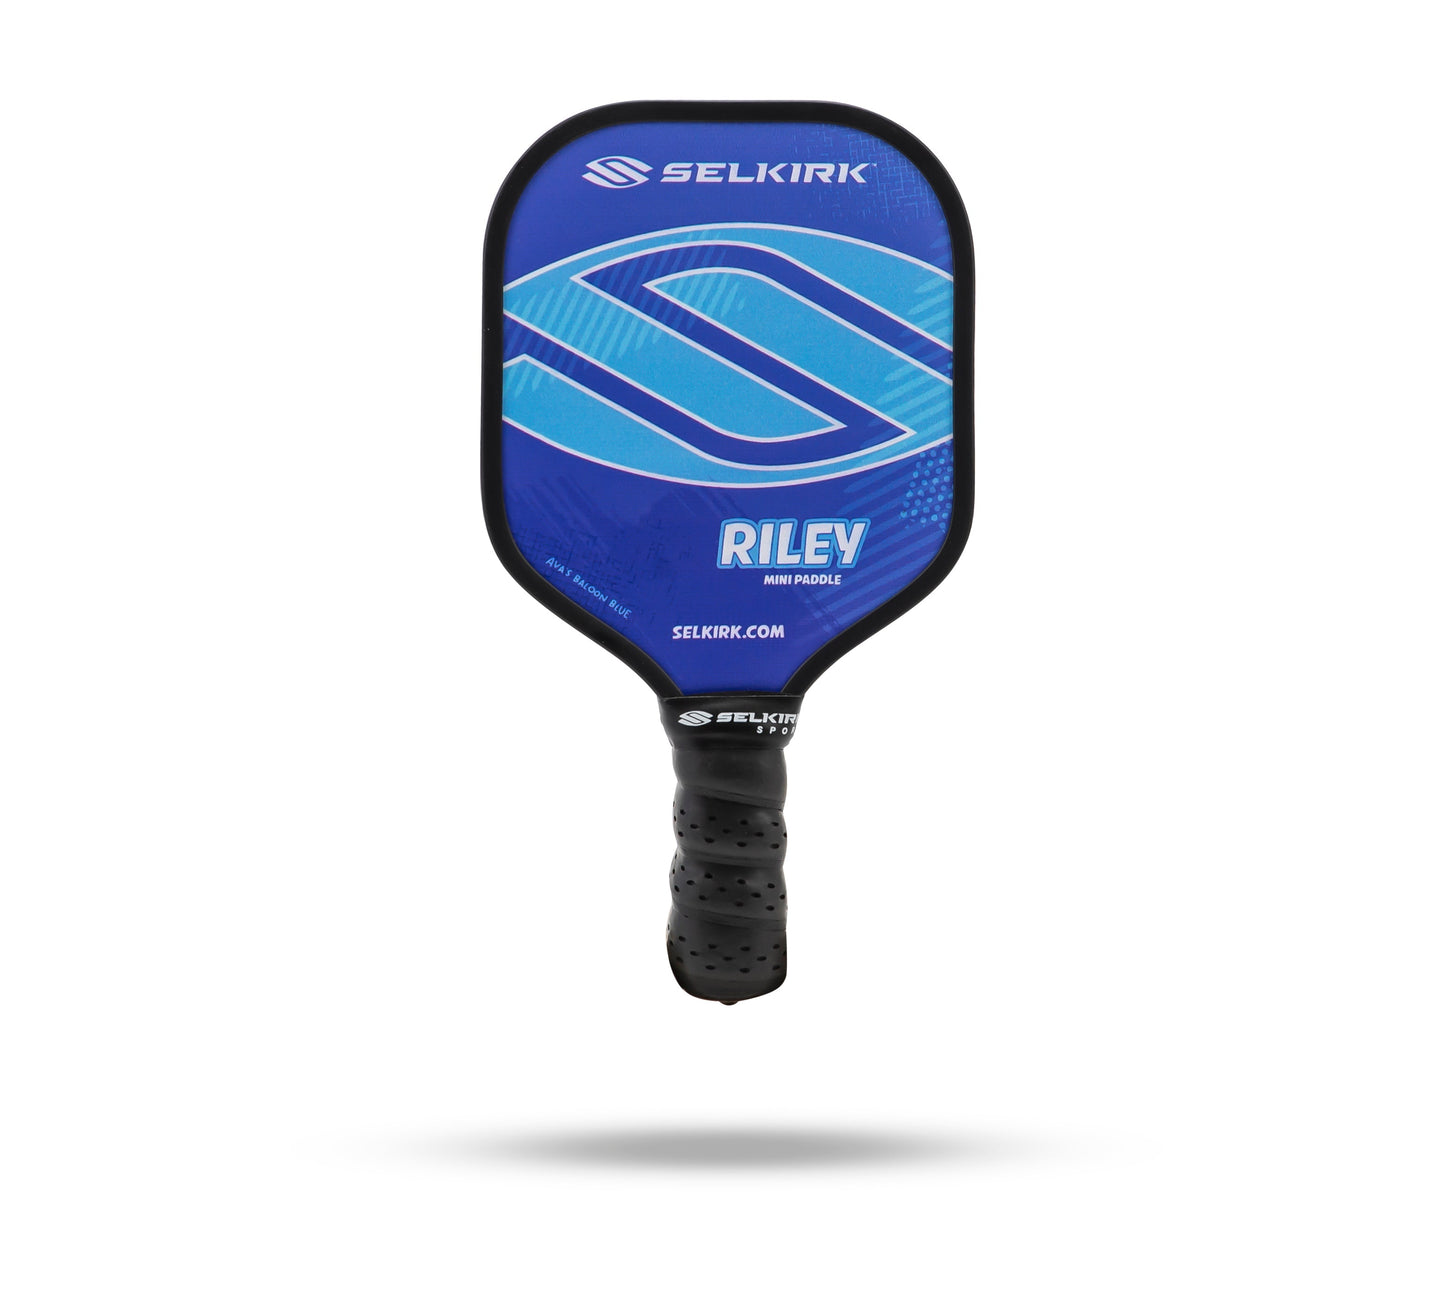 The Selkirk Riley Mini Pickleball Paddle Collection offers a fresh and unique novelty gift with a paddle that has the name Riley proudly displayed on it.